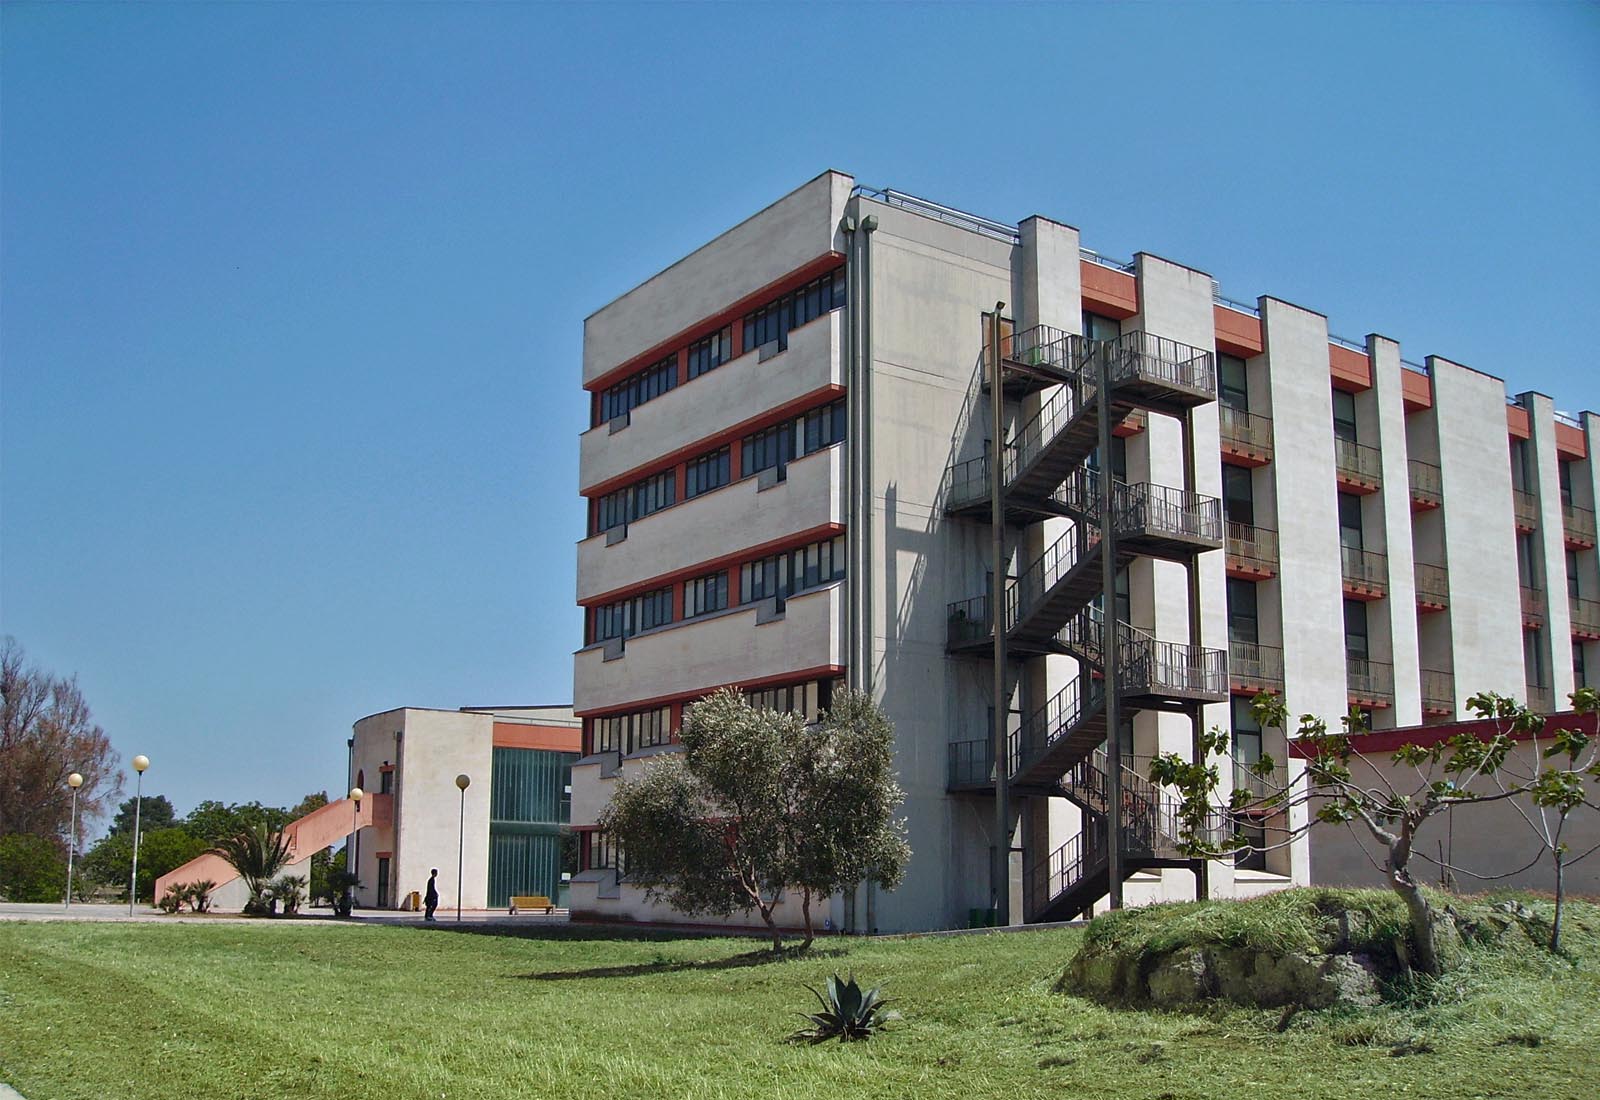 Ecotekne university center in Lecce - The department of banking sciences